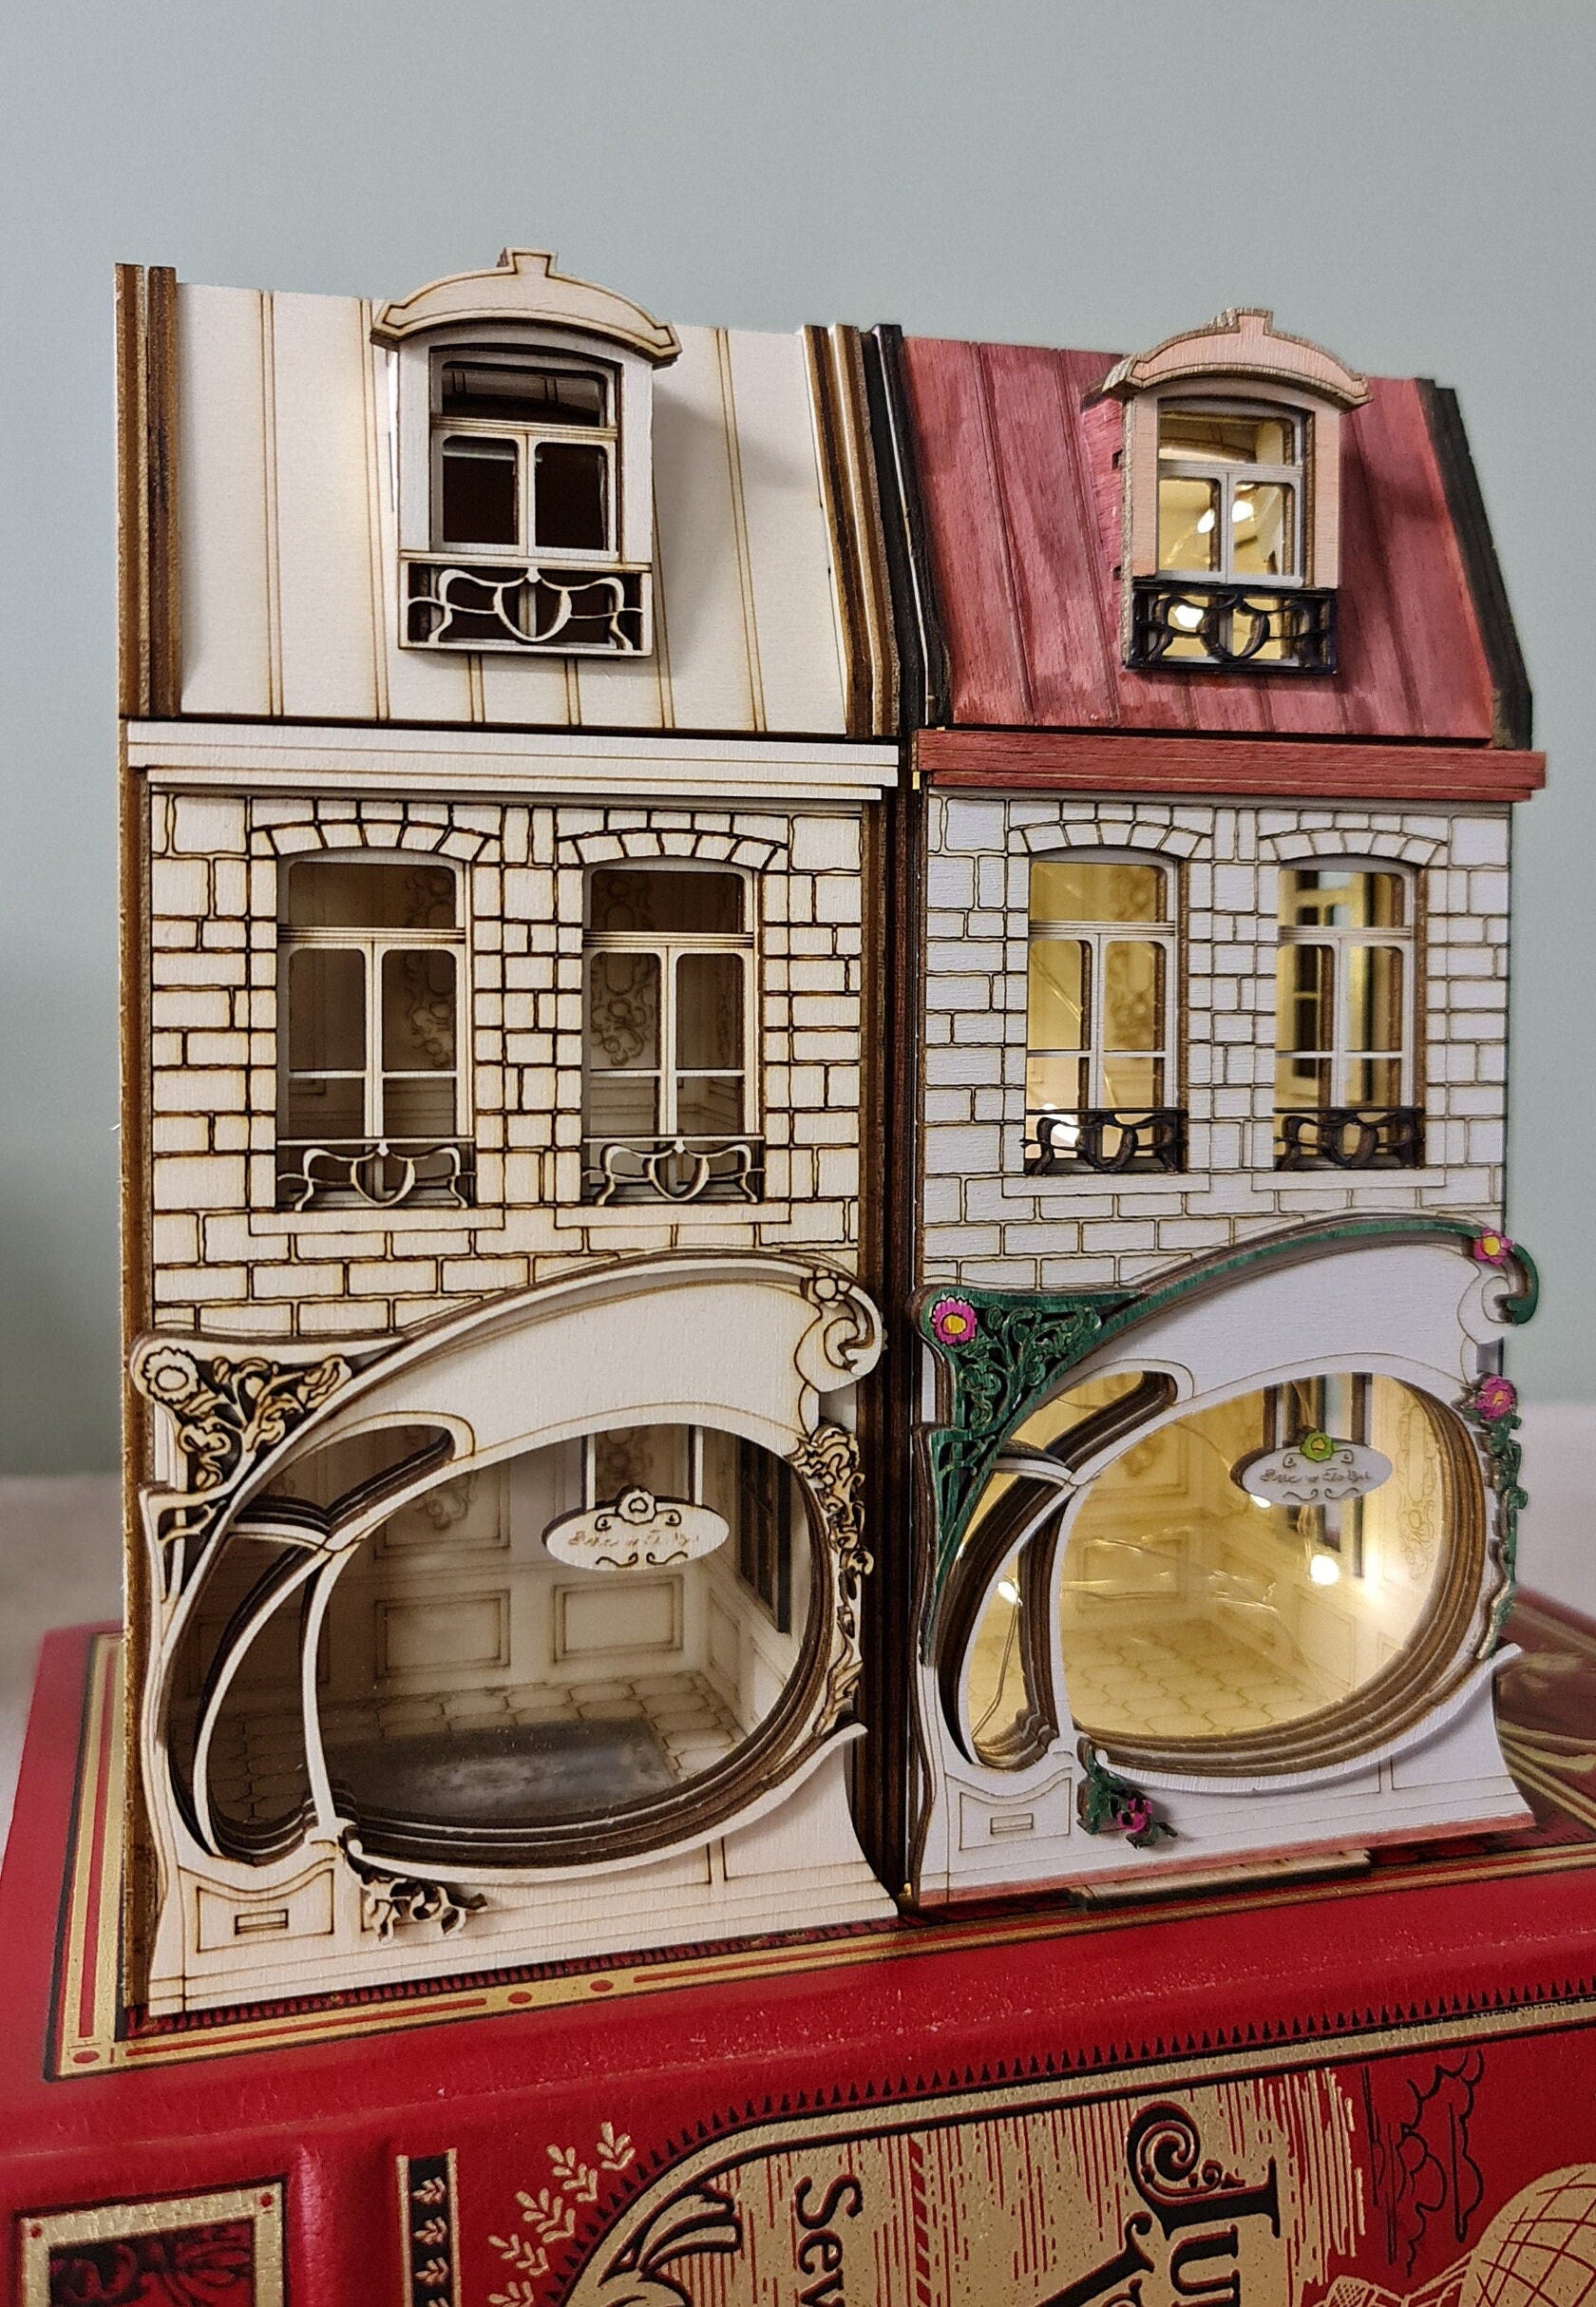 "The French Boutique", 1;48th scale